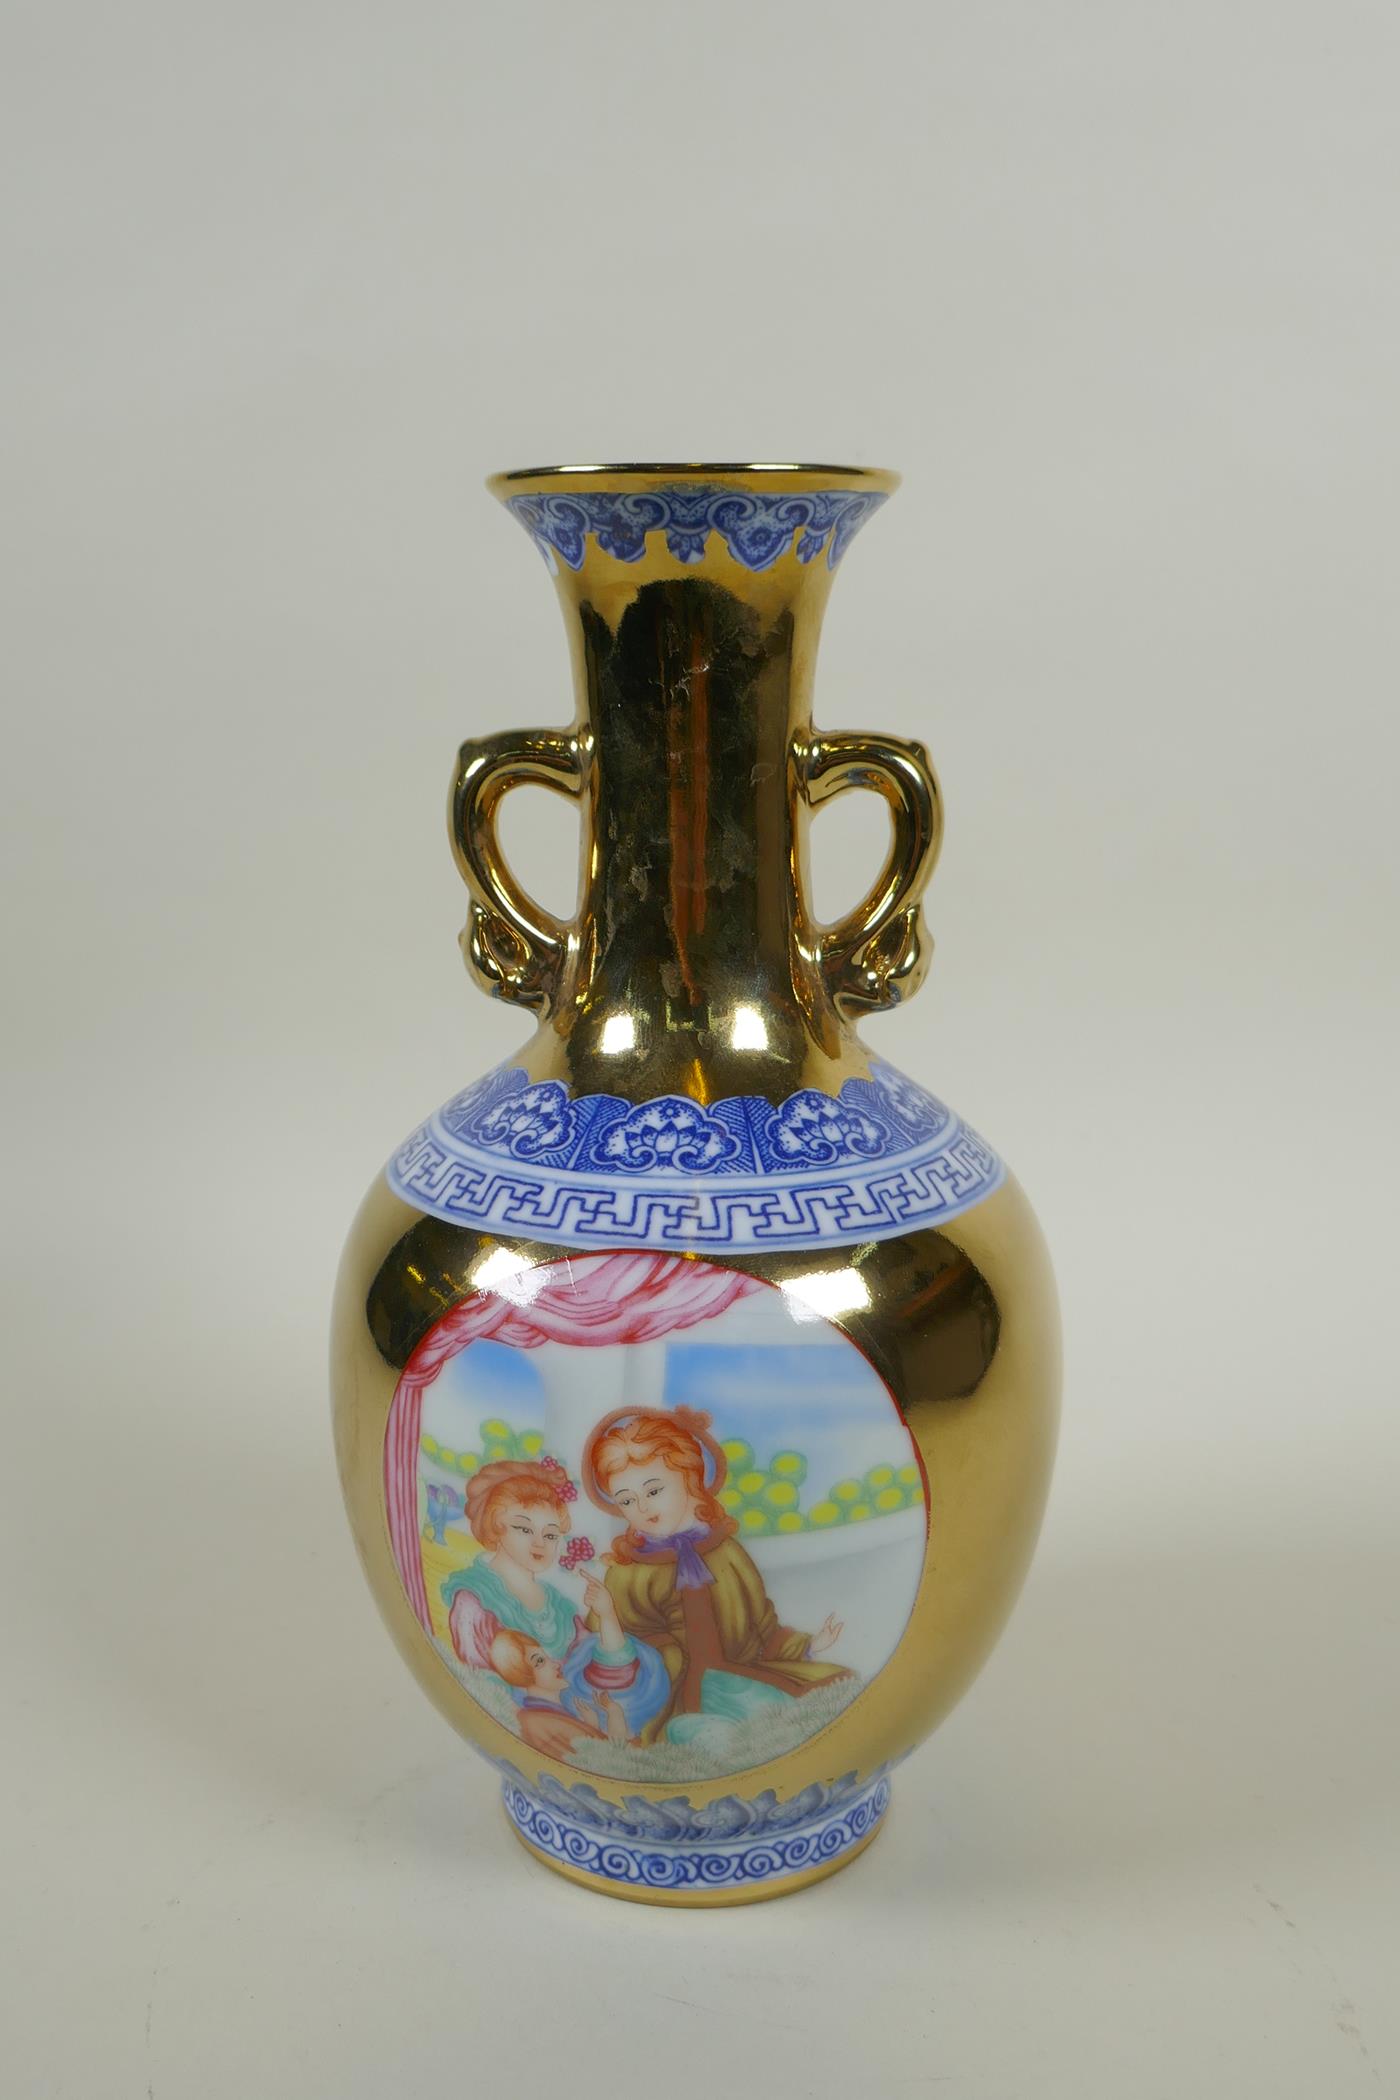 A Chinese gilt lustre and polychrome porcelain vase with two handles and decorative panels depicting - Image 2 of 5